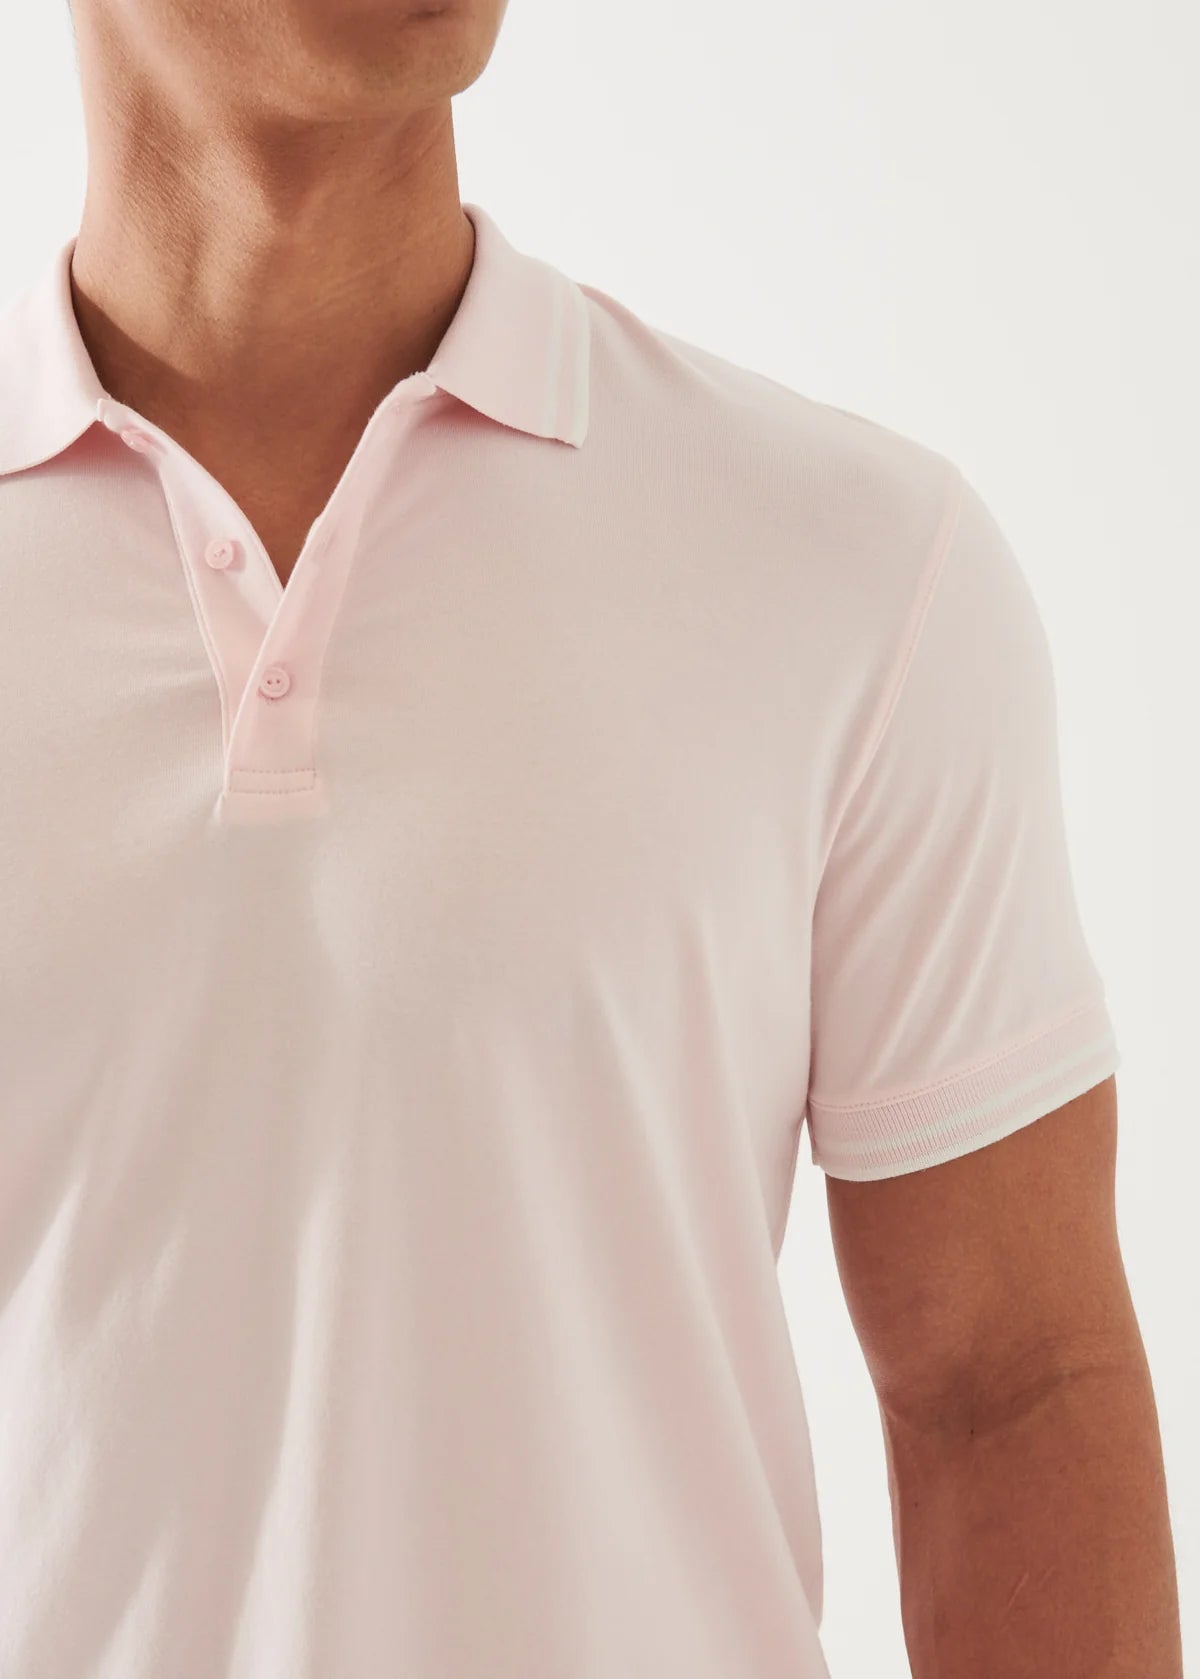 Patrick Assaraf SS Iconic Tipped Polo Pale Pink